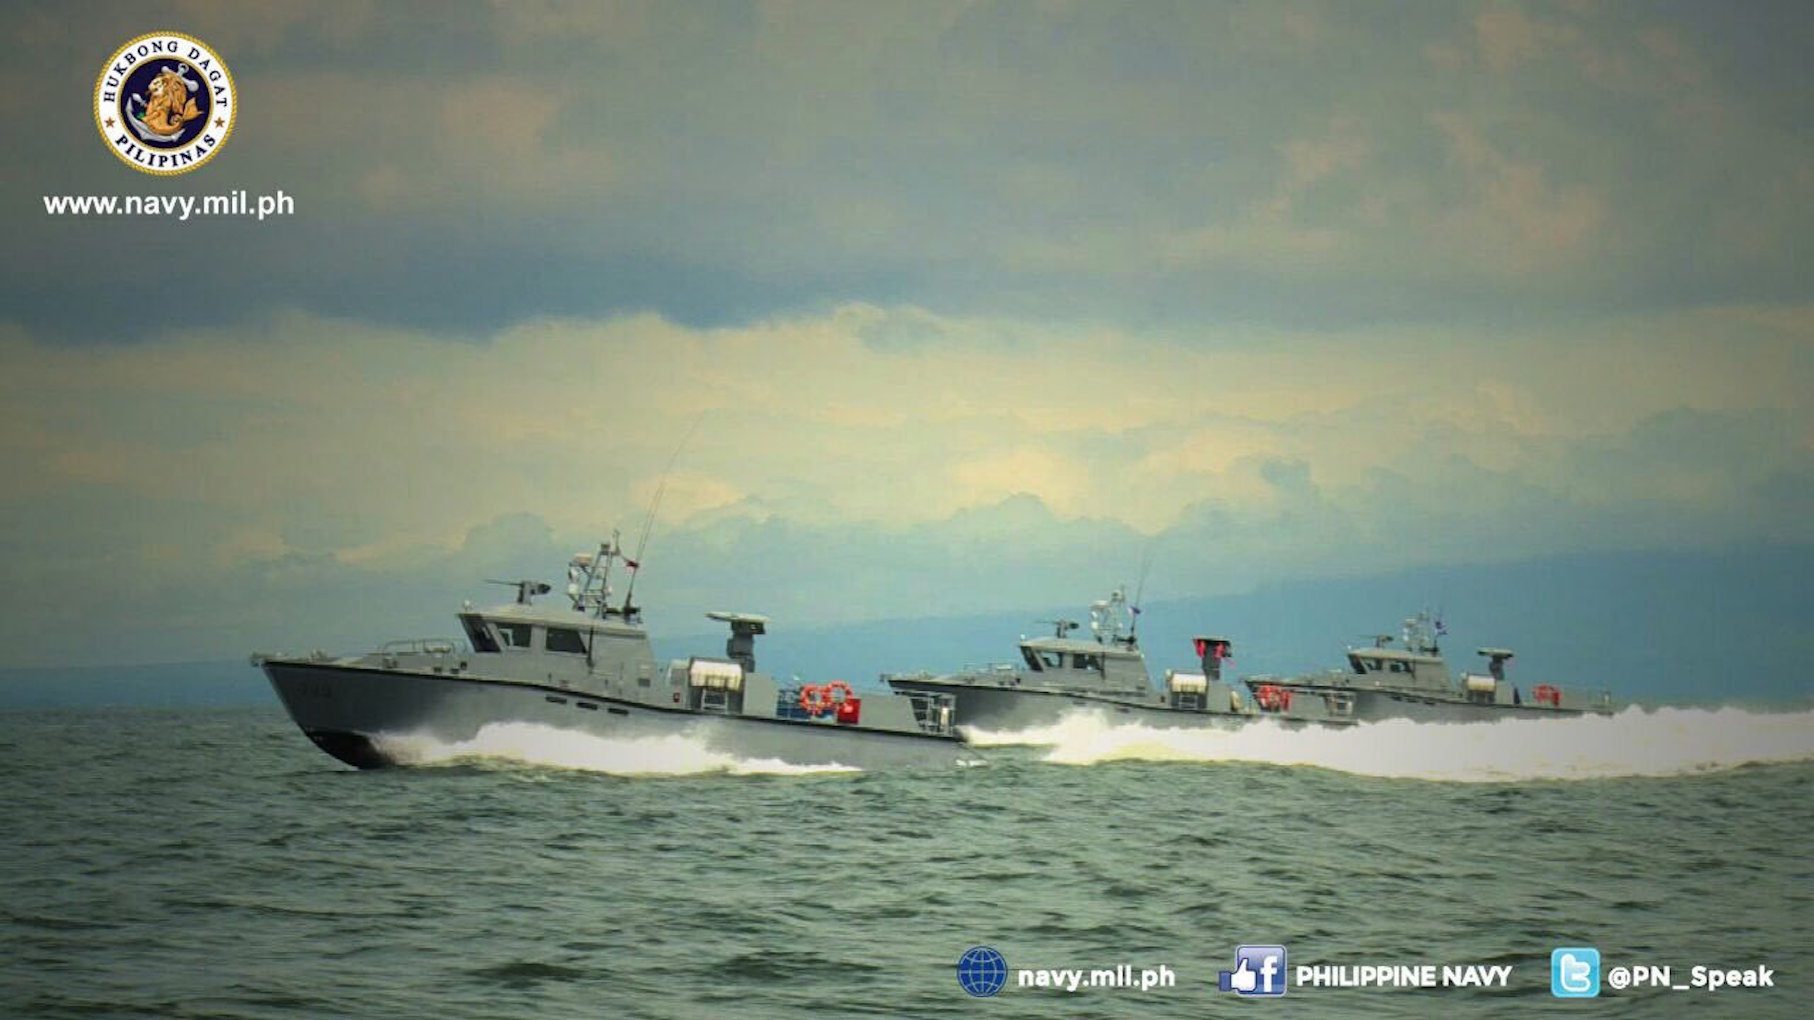 ATTACK CRAFT. The Philippine Navy's multi-purpose attack craft (MPAC) on a test sail. Photo from the Philippine Navy 